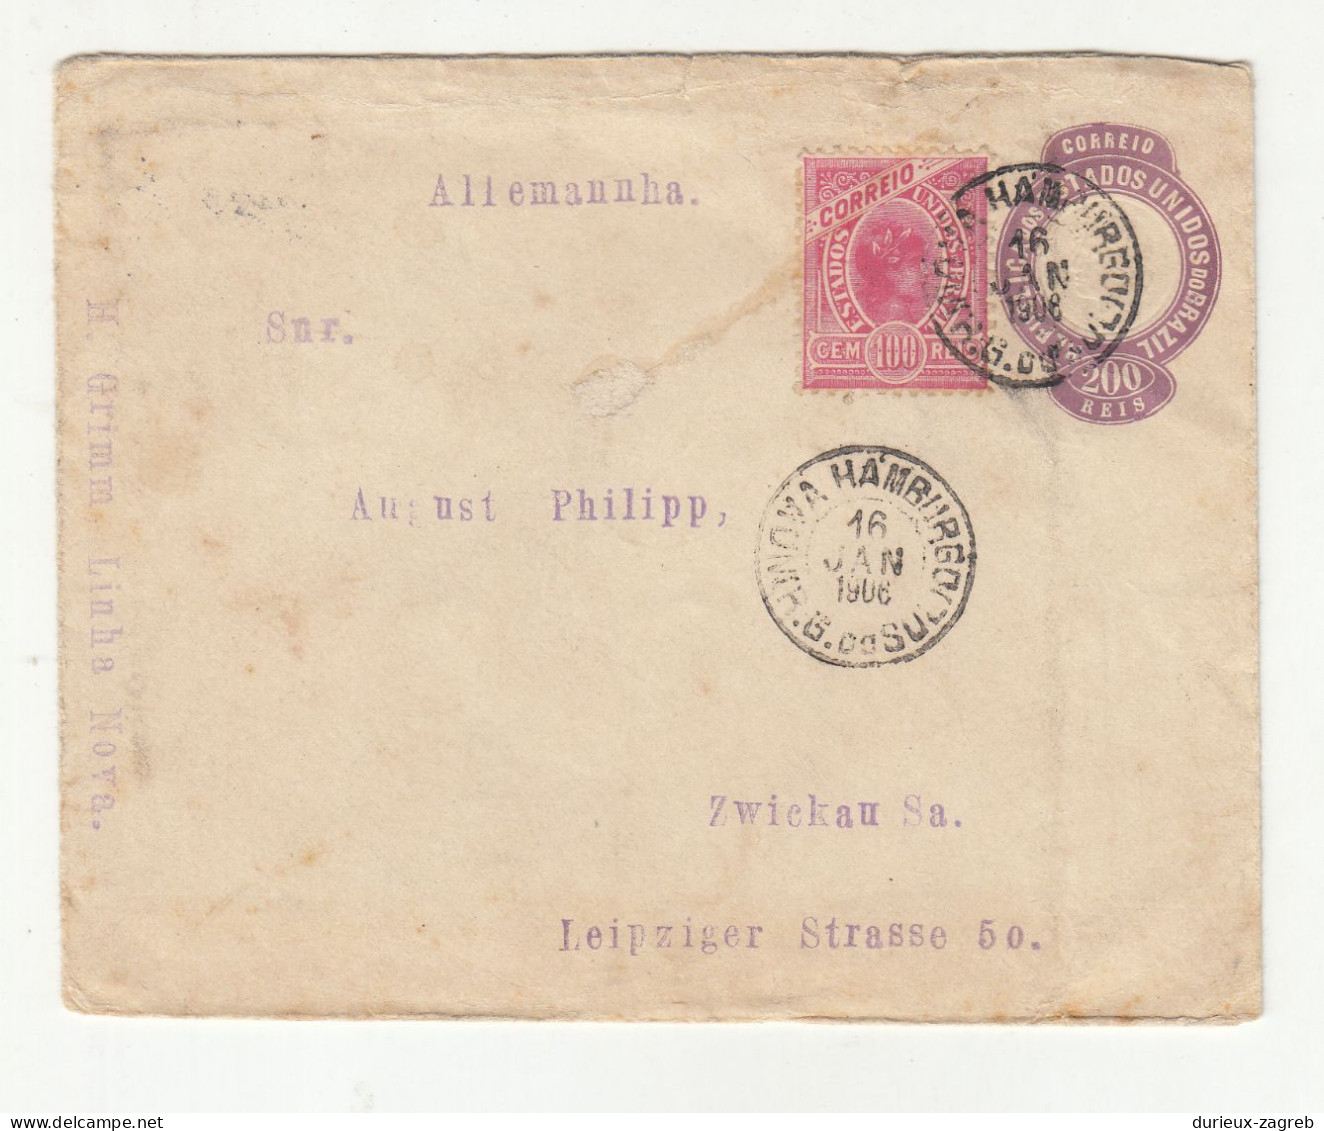 Brazil 200 Reis Postal Stationery Letter Cover Posted 1906 To Germany - Uprated B240401 - Entiers Postaux